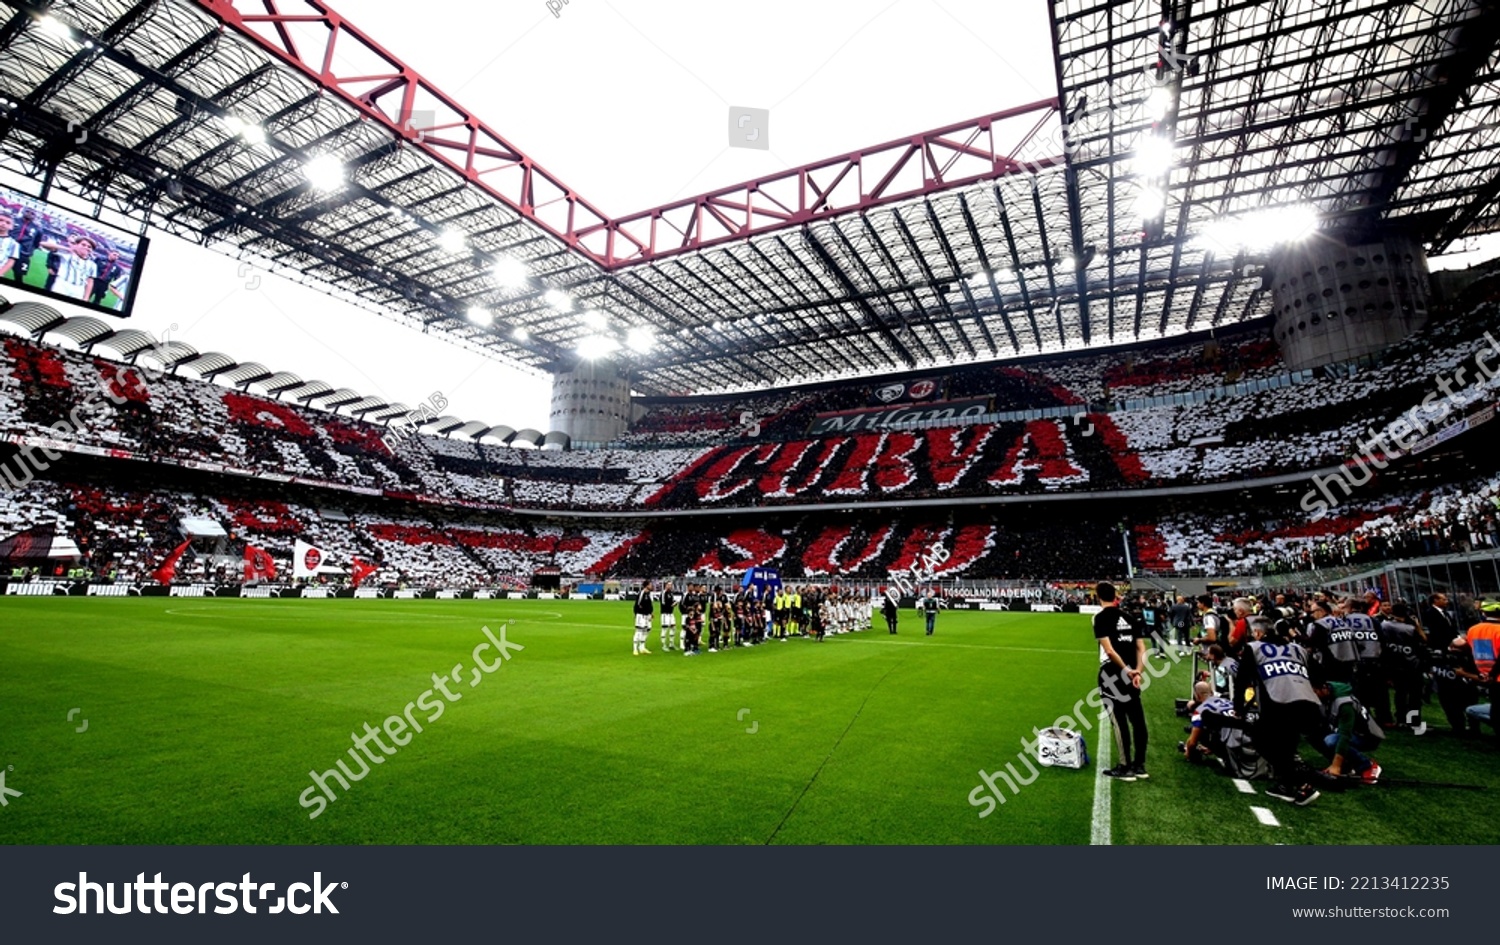 tobacco Earth Sanctuary 25 Choreography Of Milan's Fans Images, Stock Photos & Vectors |  Shutterstock